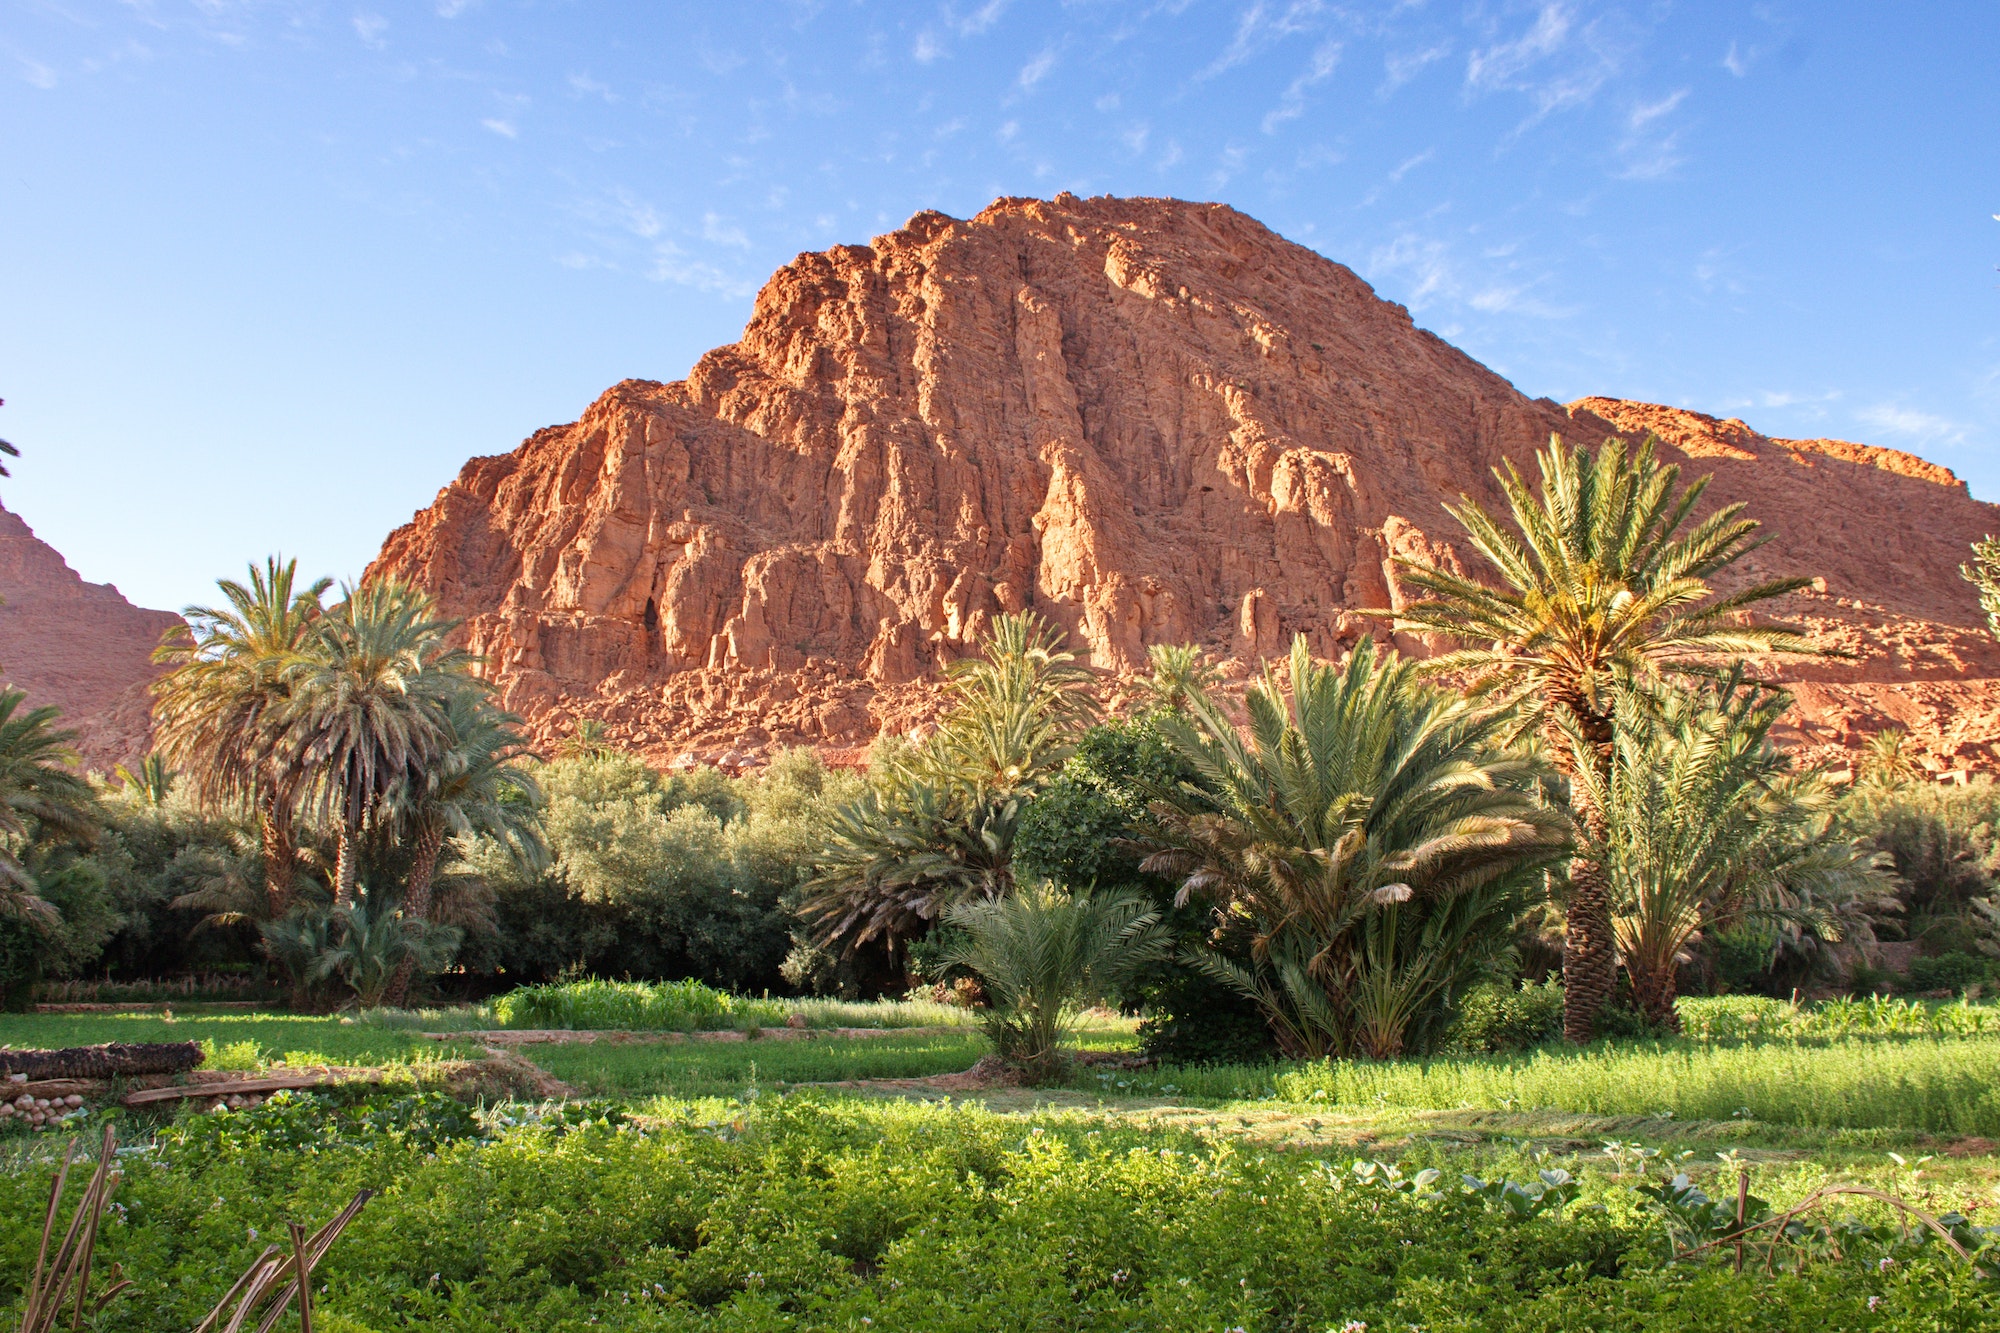 Landscape of Dades valley in Morocco